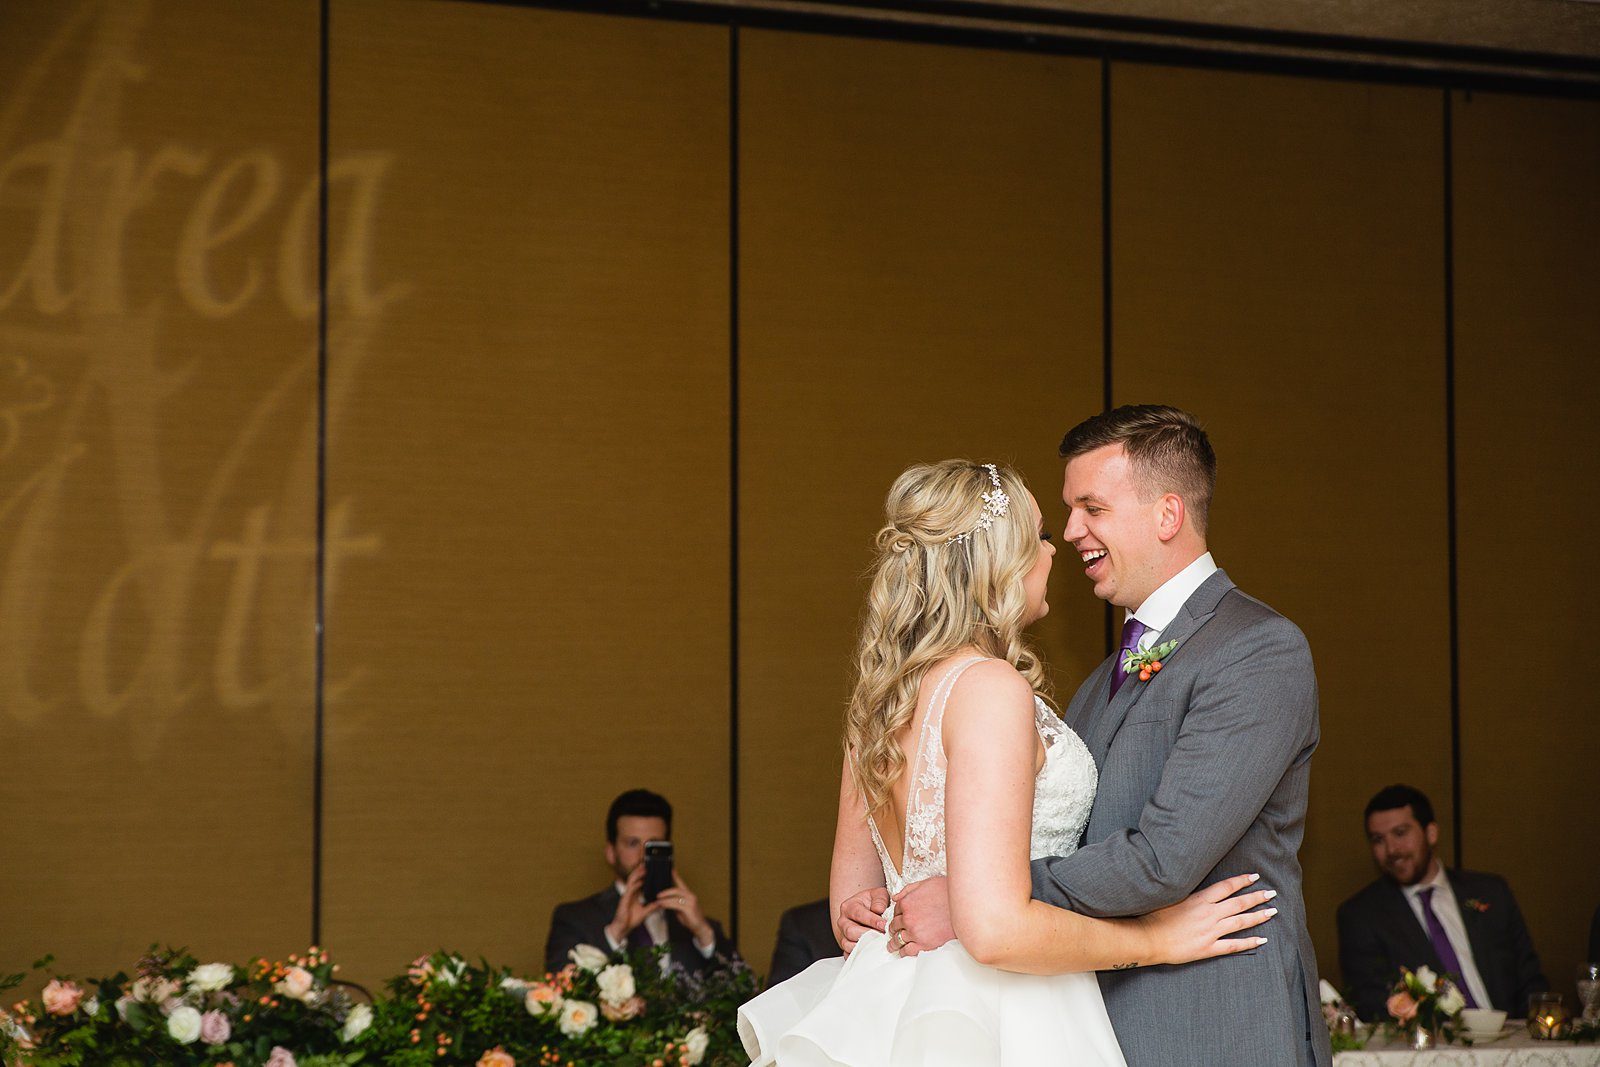 Bride and Groom sharing first dance at their The Scottsdale Resort at McCormick Ranch wedding reception by Arizona wedding photographer PMA Photography.